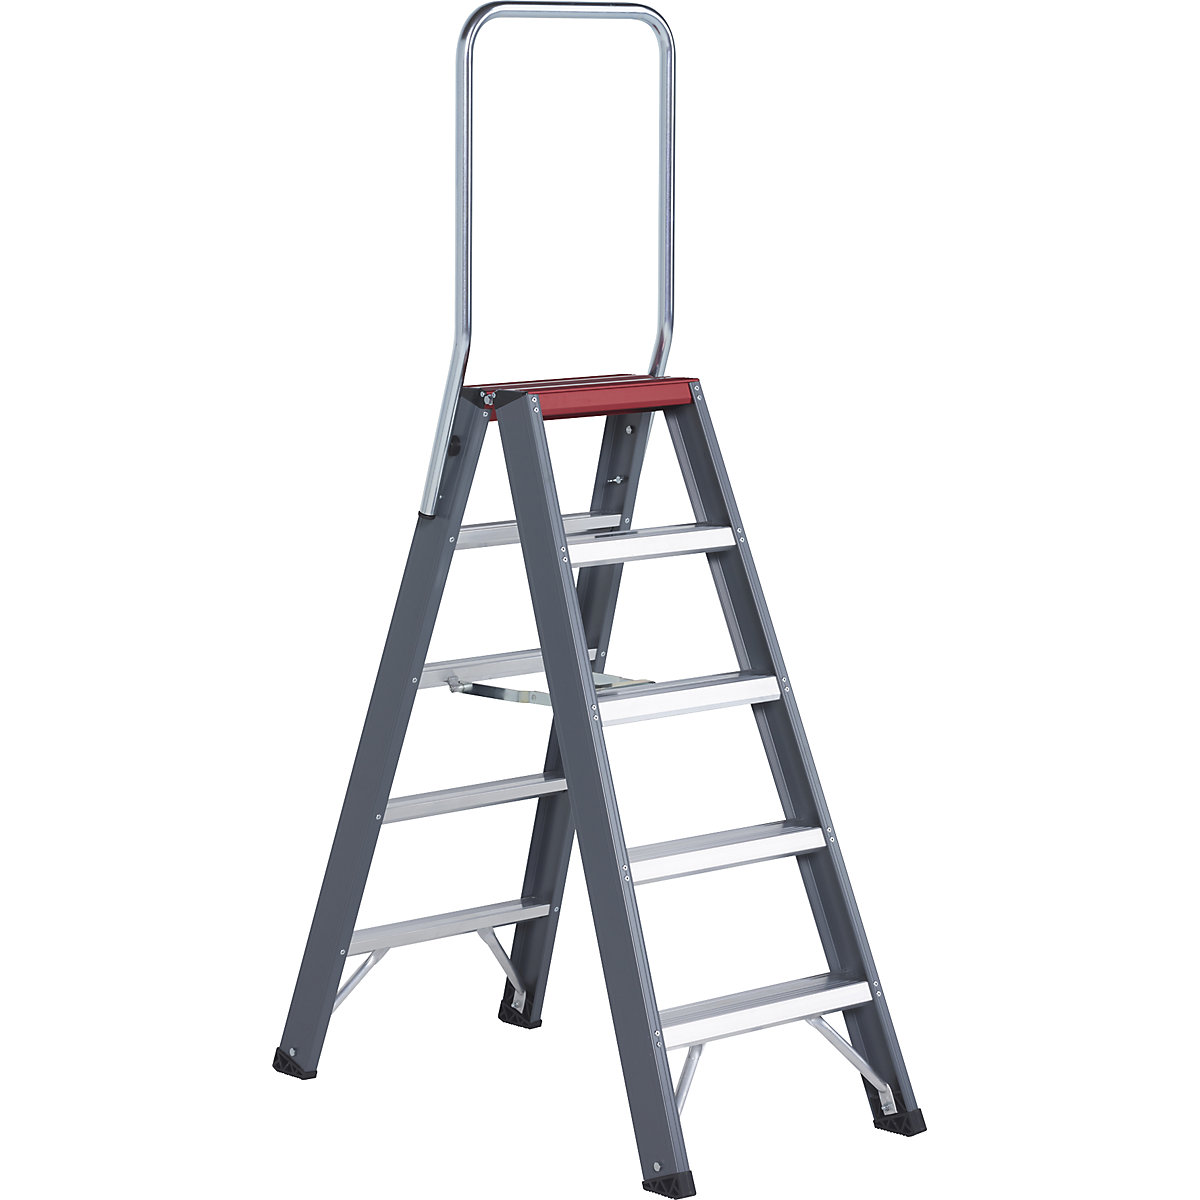 Aluminium step ladder – Altrex, double sided access, 2 x 5 steps, working height 3200 mm-5